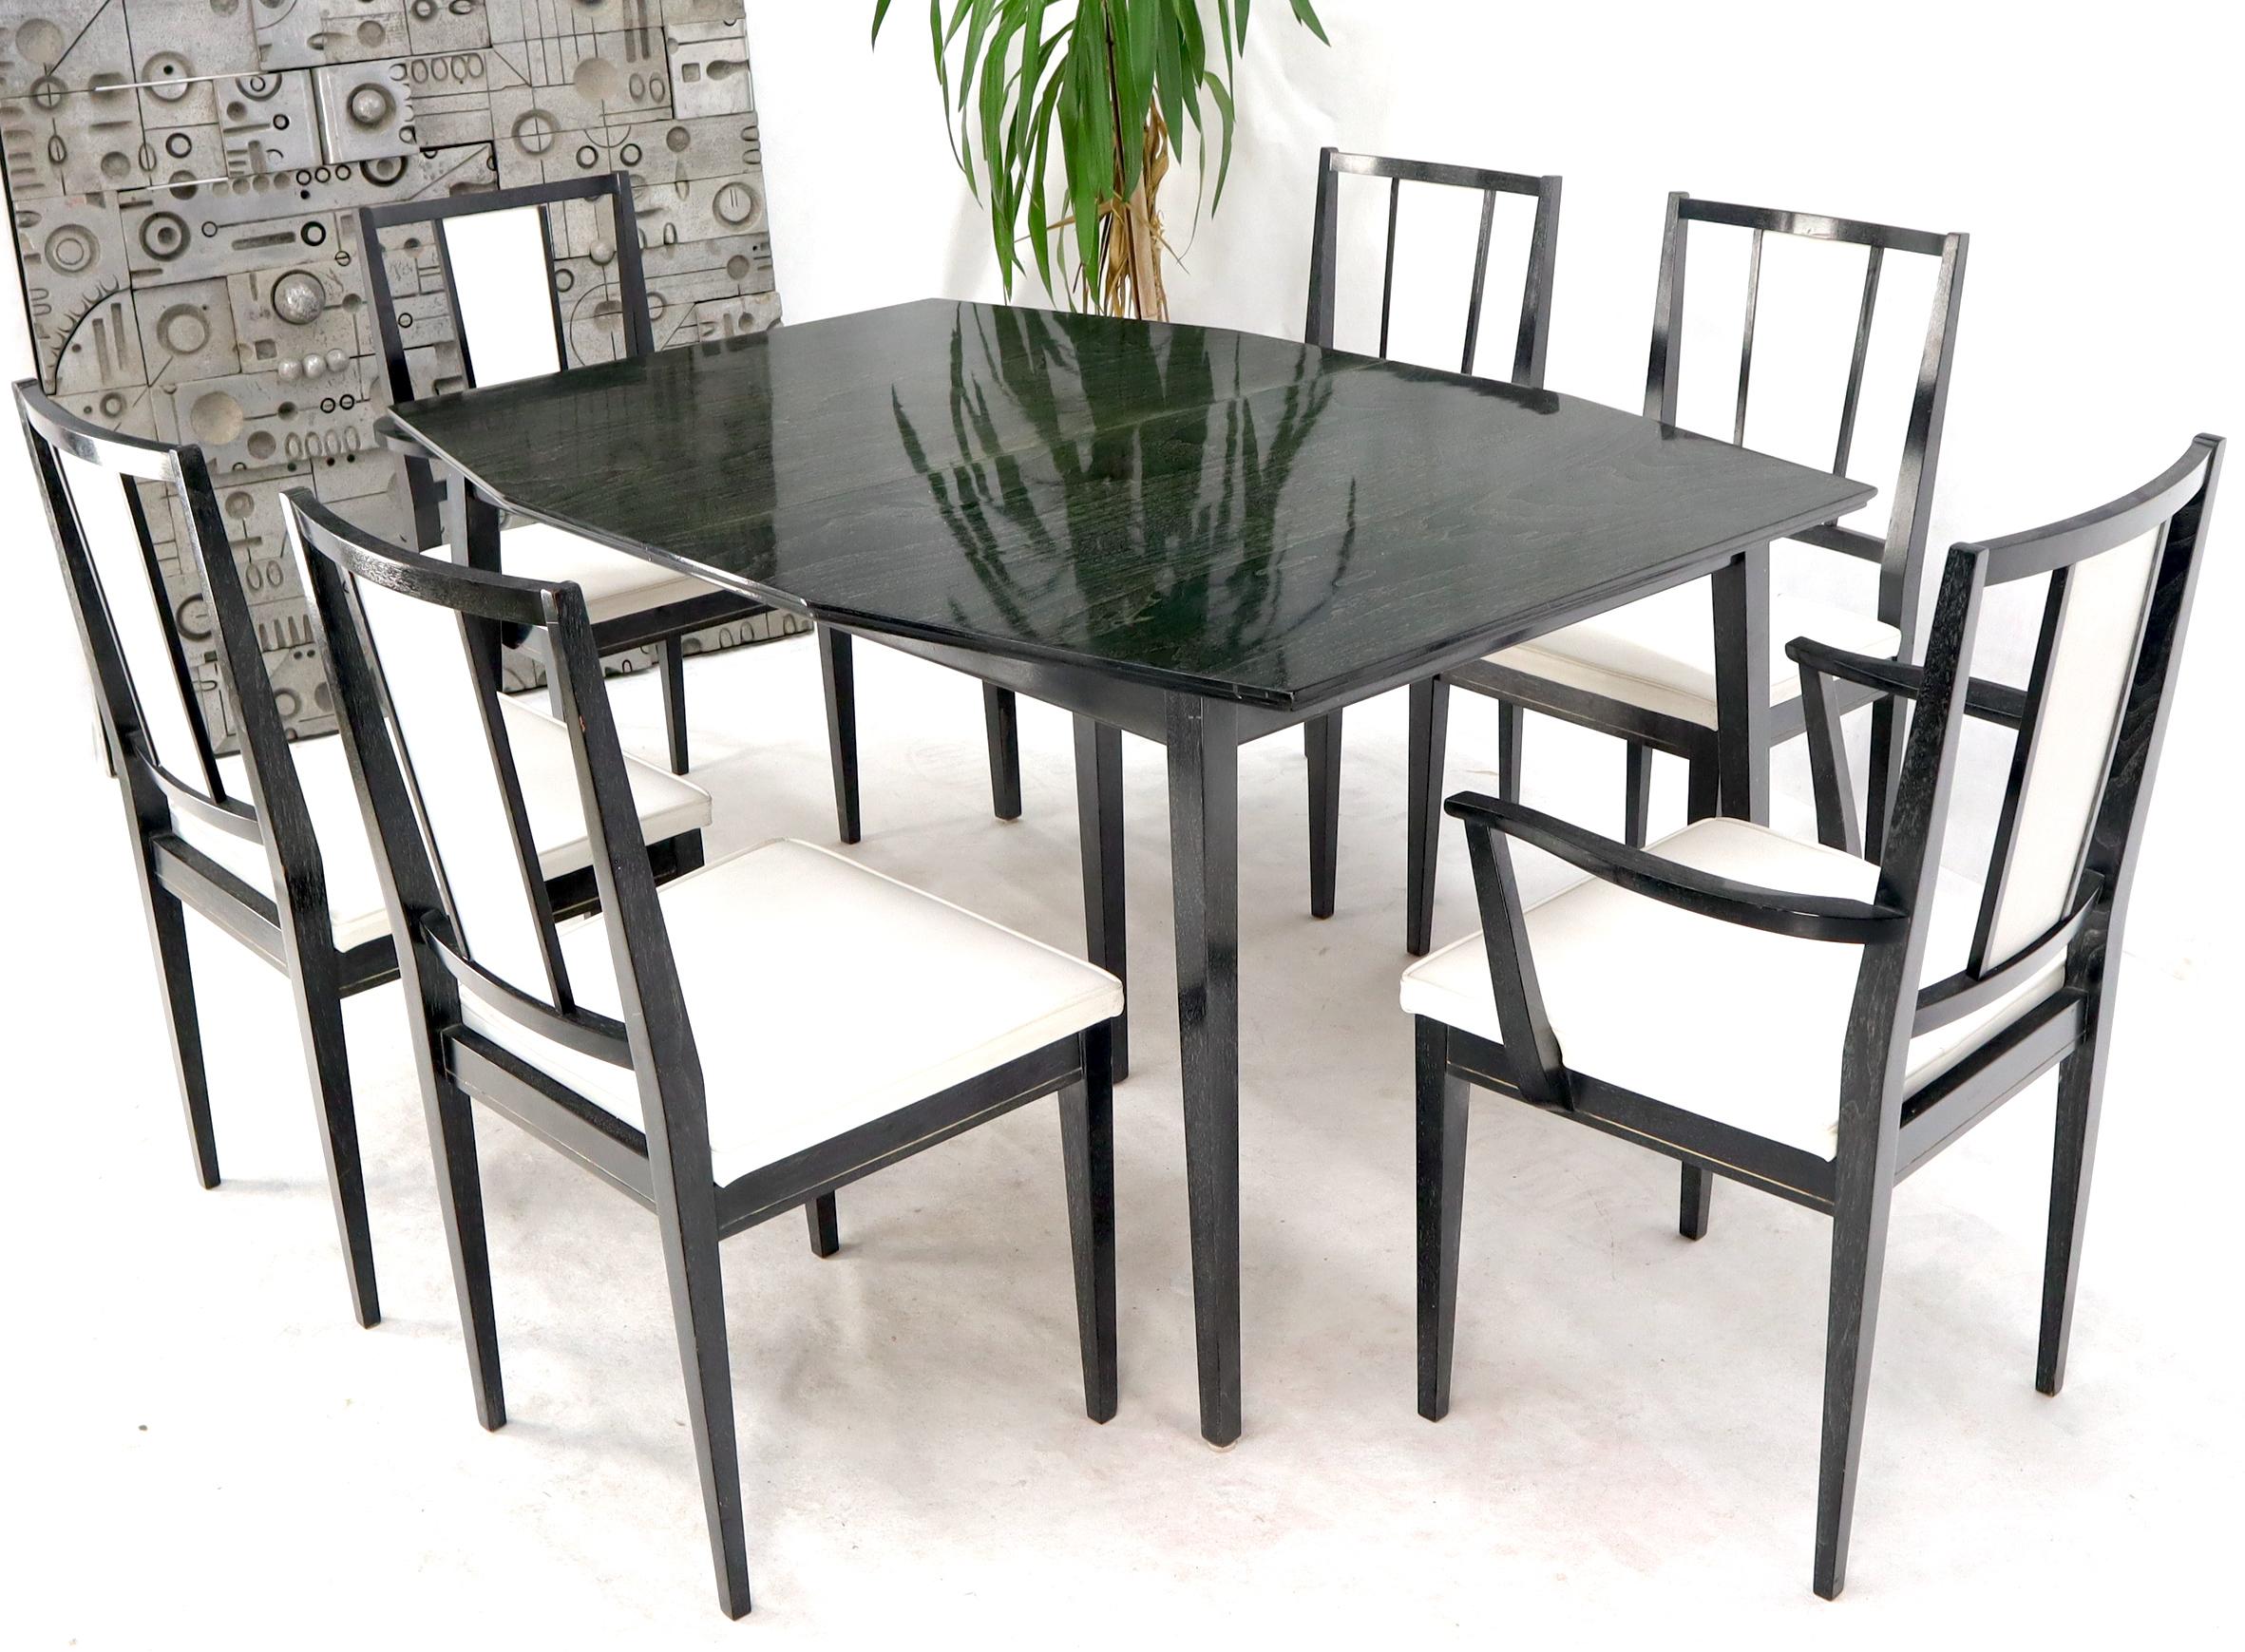 American Cerused Ebonized Walnut Dining Room Table 6 Chairs Set w/ Two Extension Boards For Sale